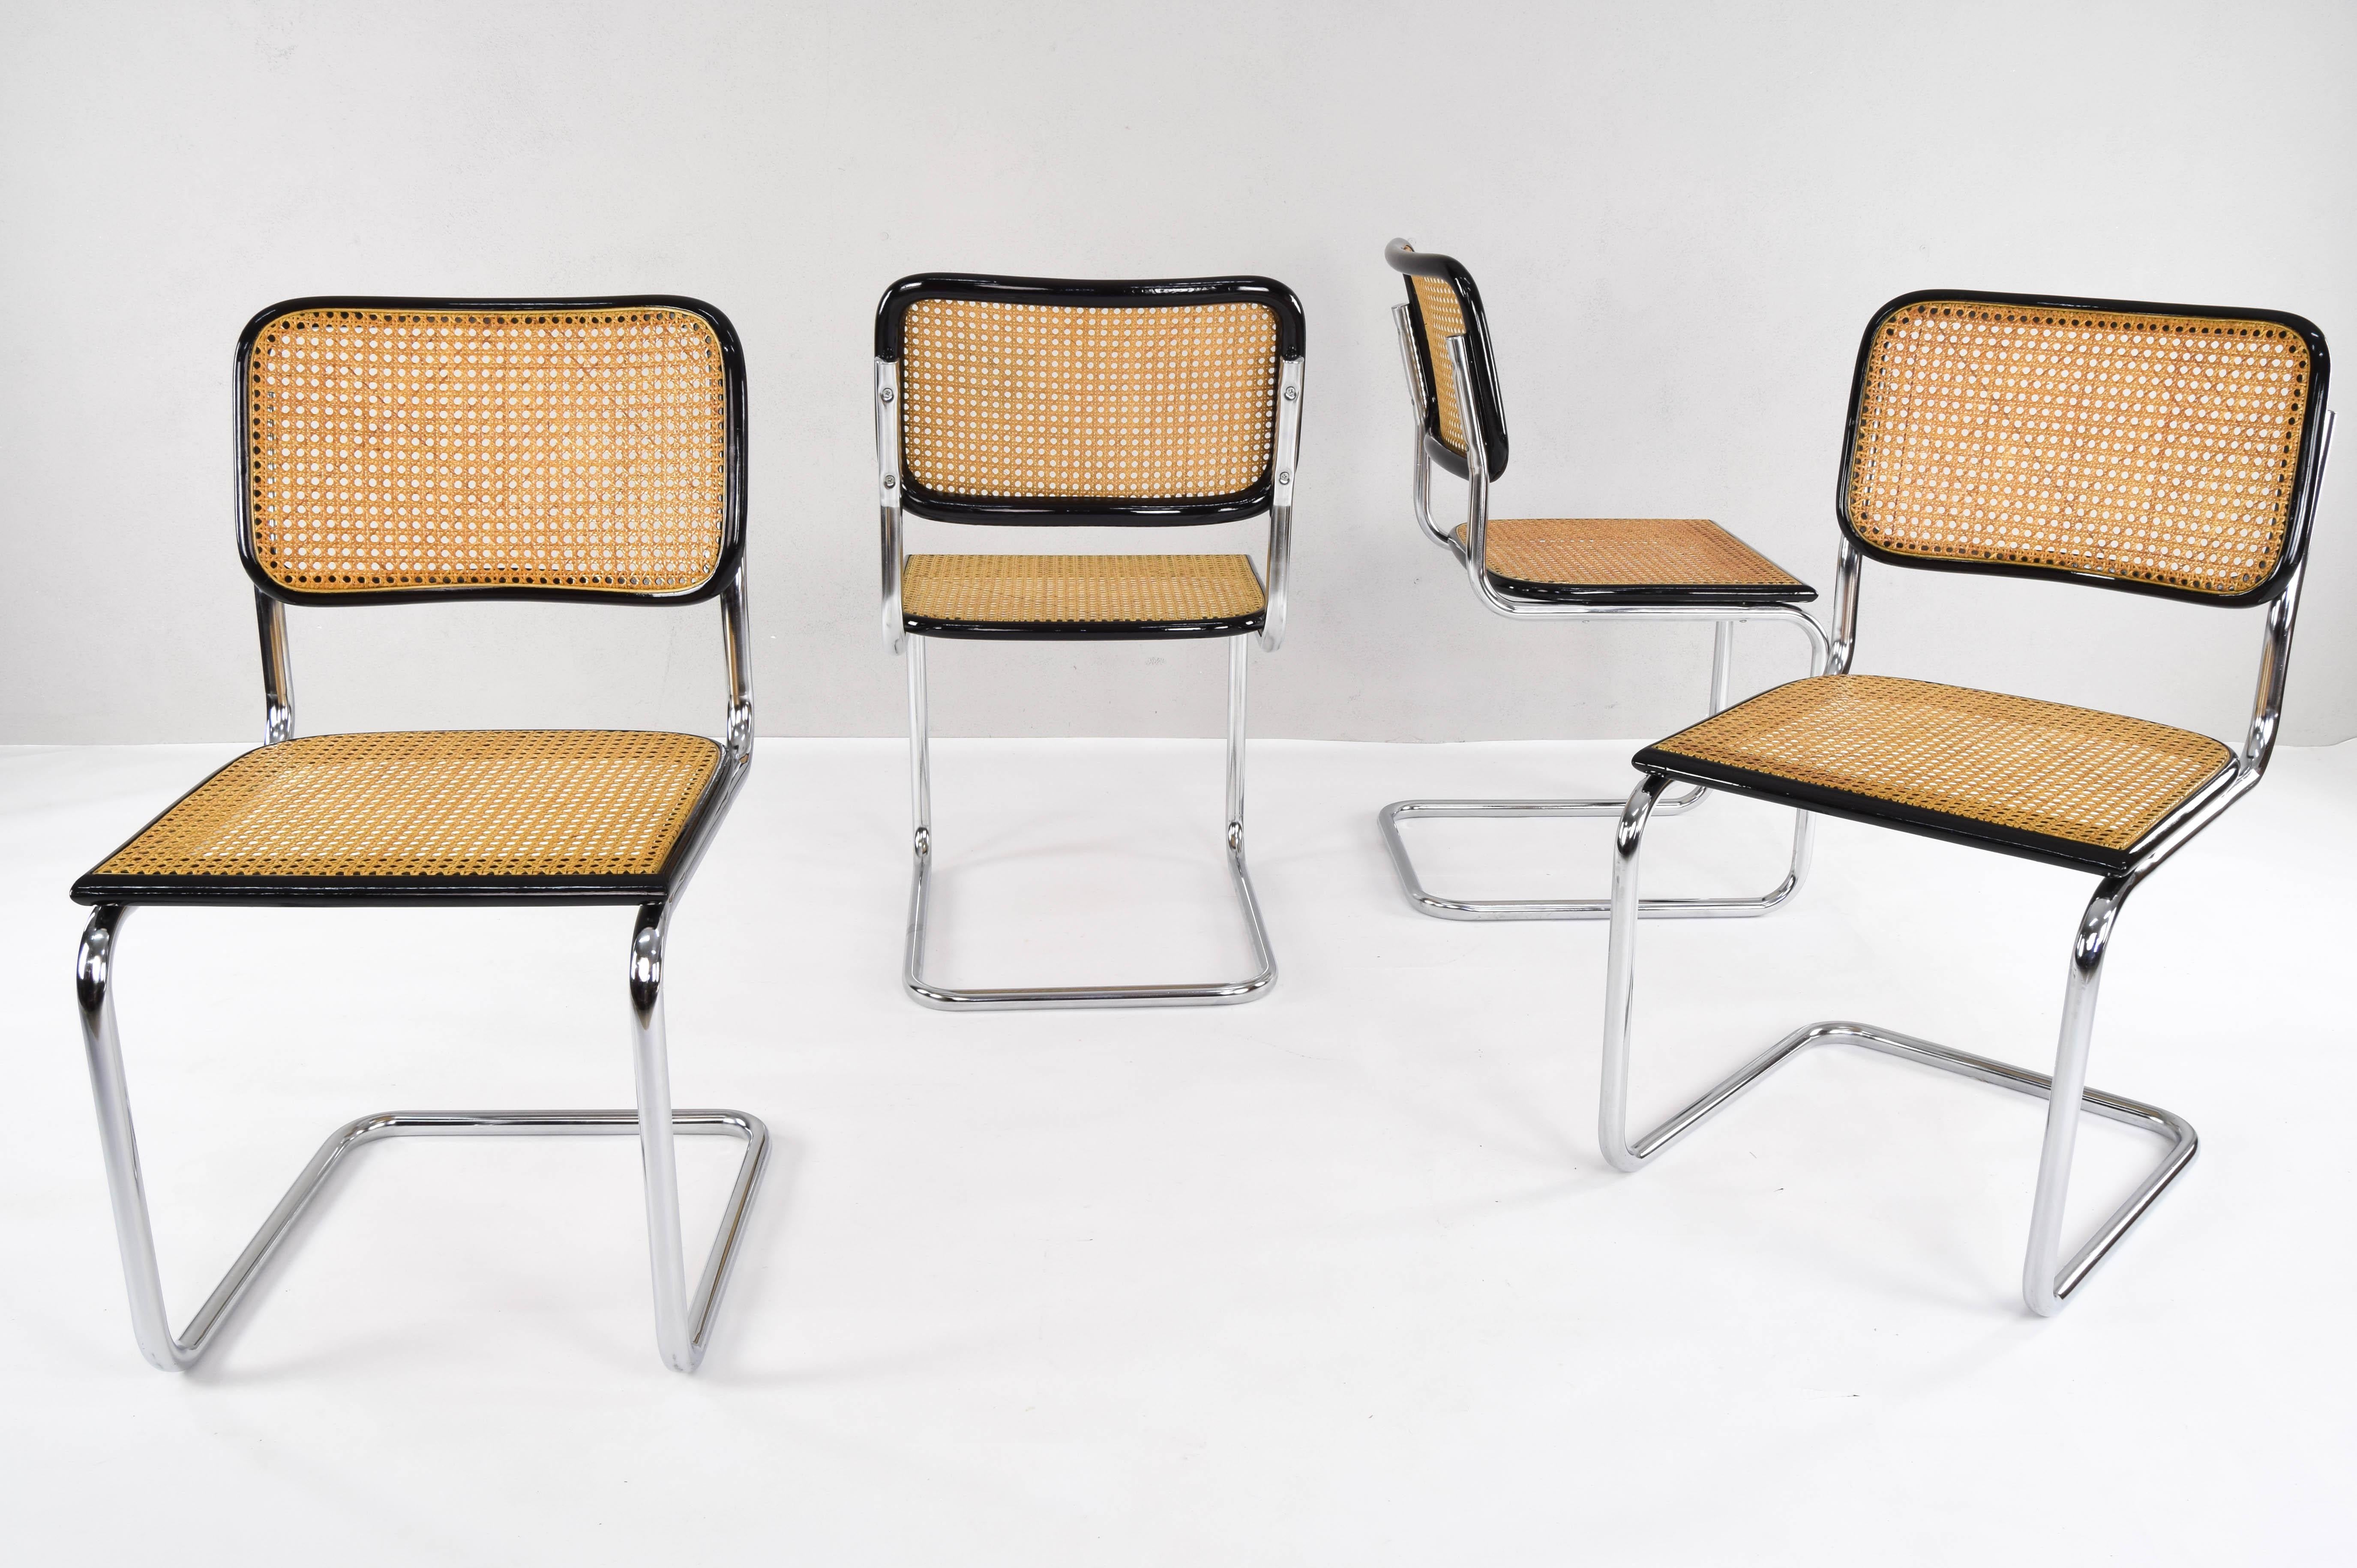 Set of four Cesca chairs, model B32, manufactured in Italy in the 1970s. Chrome tubular structure, beech wood frames lacquered in black and Viennese natural grid.

Measures: 
Total height 84 cm
Seat height 46 cm
Width 46 cm
Depth 52 cm.